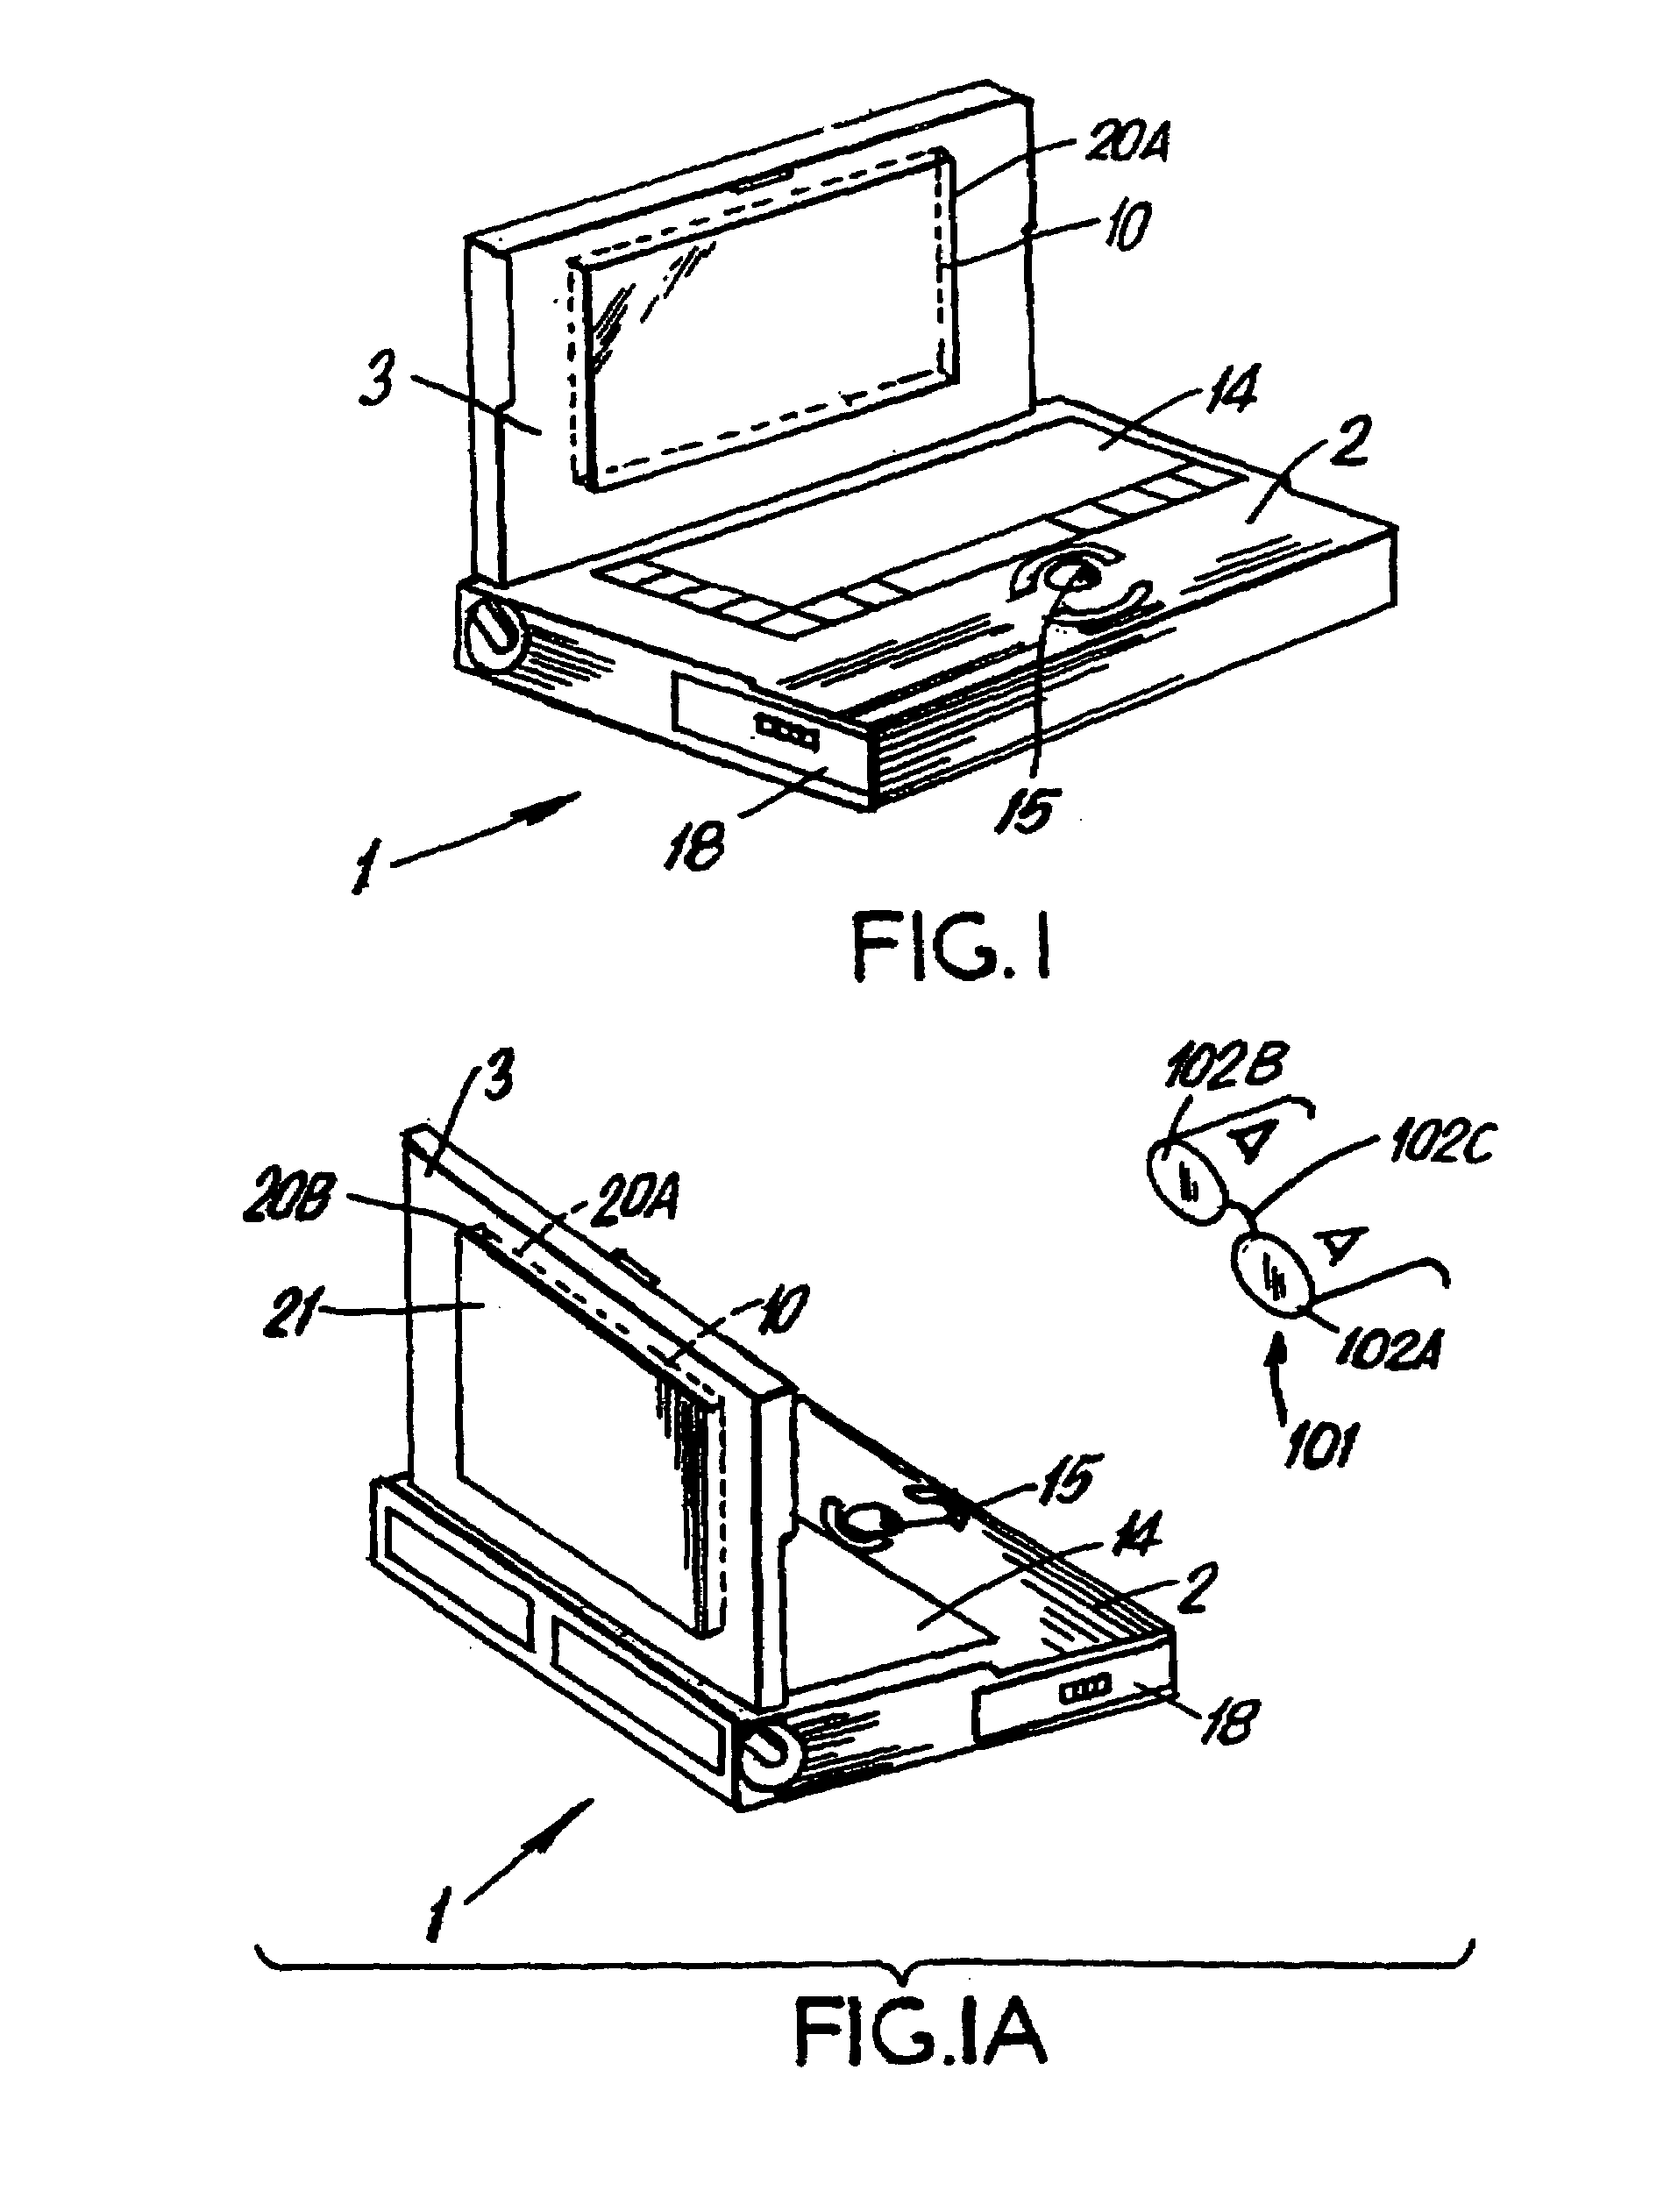 Backlighting construction for use in computer-based display systems having direct and projection viewing modes of operation